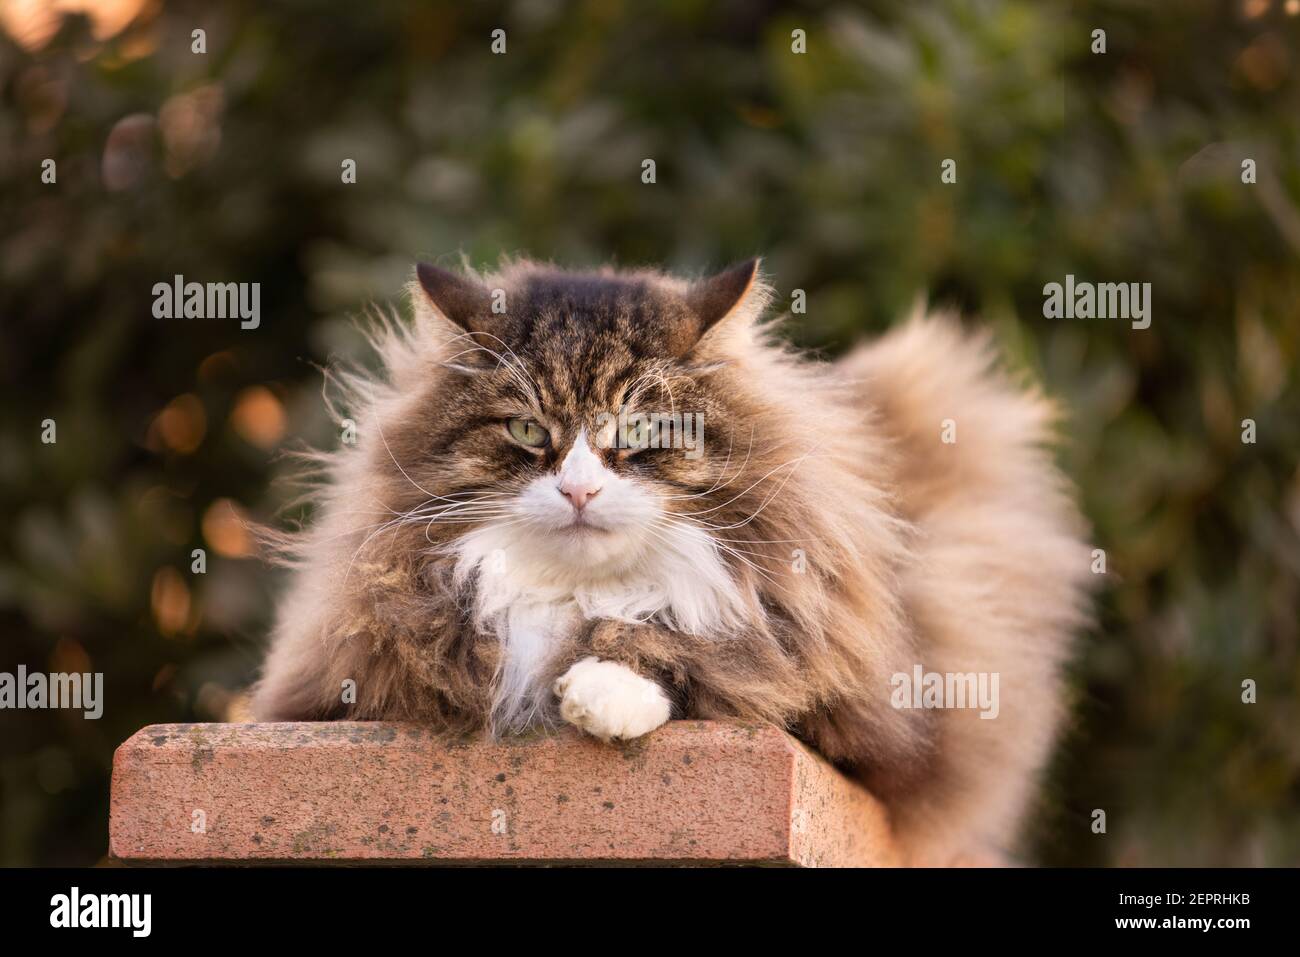 beautiful fluffy cat with very long whiskers and eyebrows looking at the camera Stock Photo